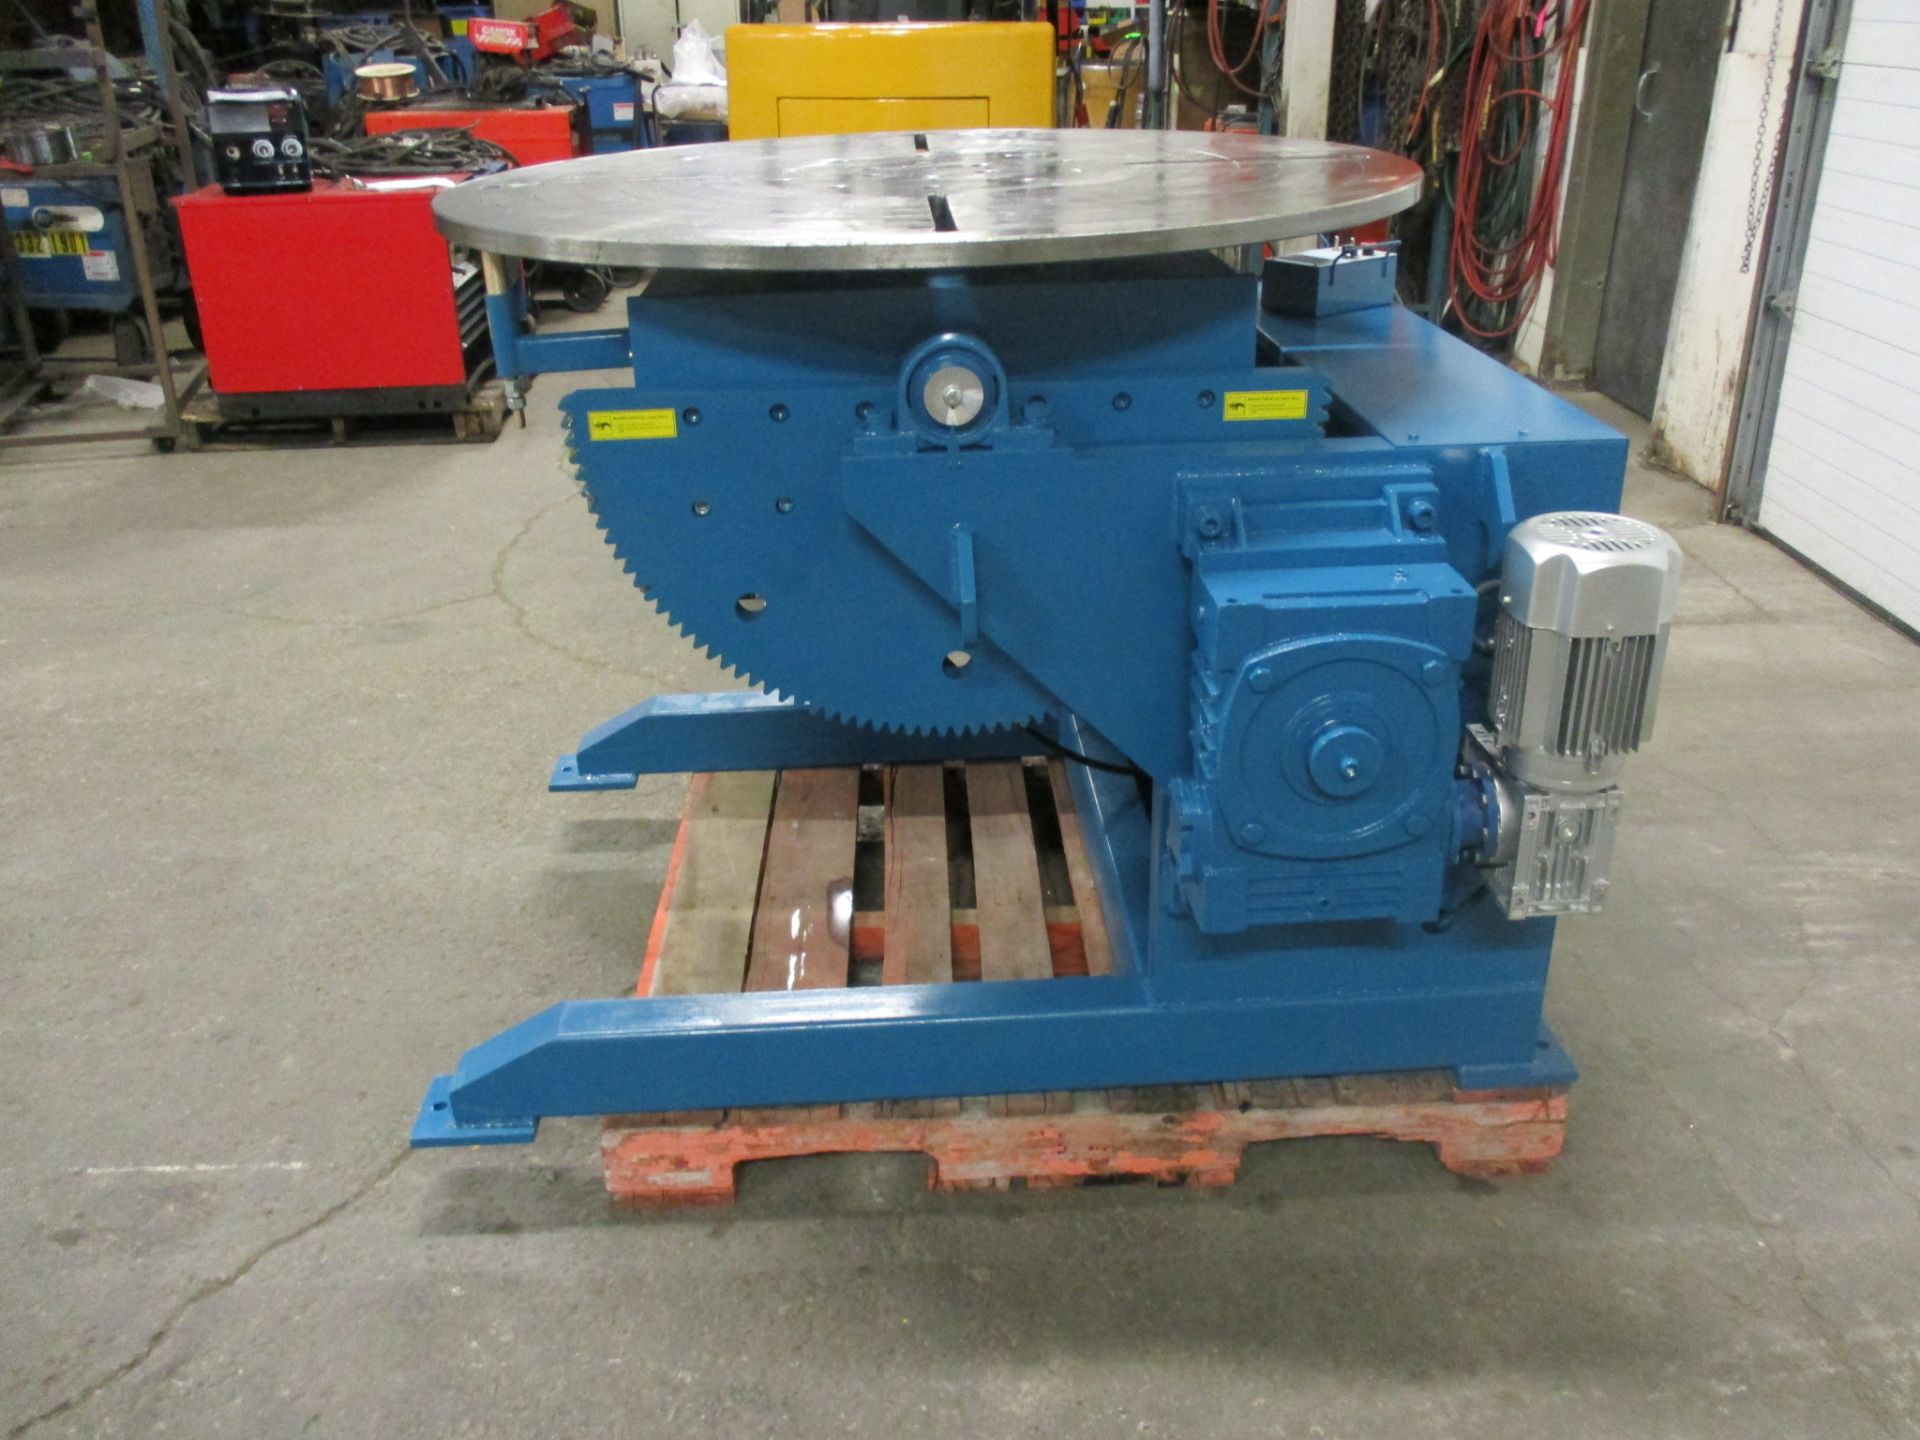 Verner model VD-3000 WELDING POSITIONER 3000lbs capacity - tilt and rotate with variable speed drive - Image 2 of 2